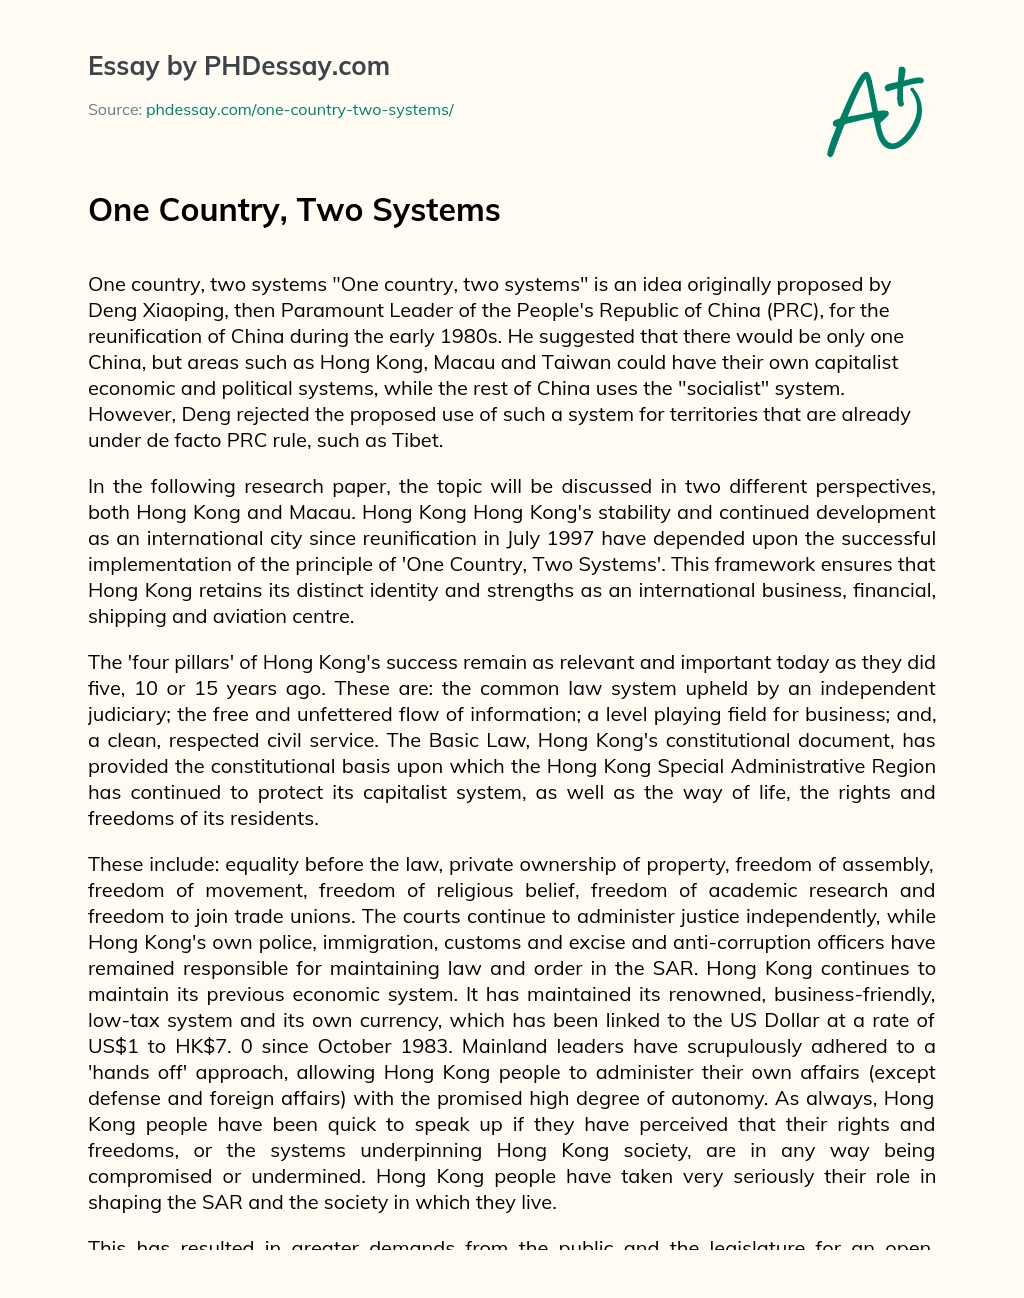 One Country, Two Systems essay